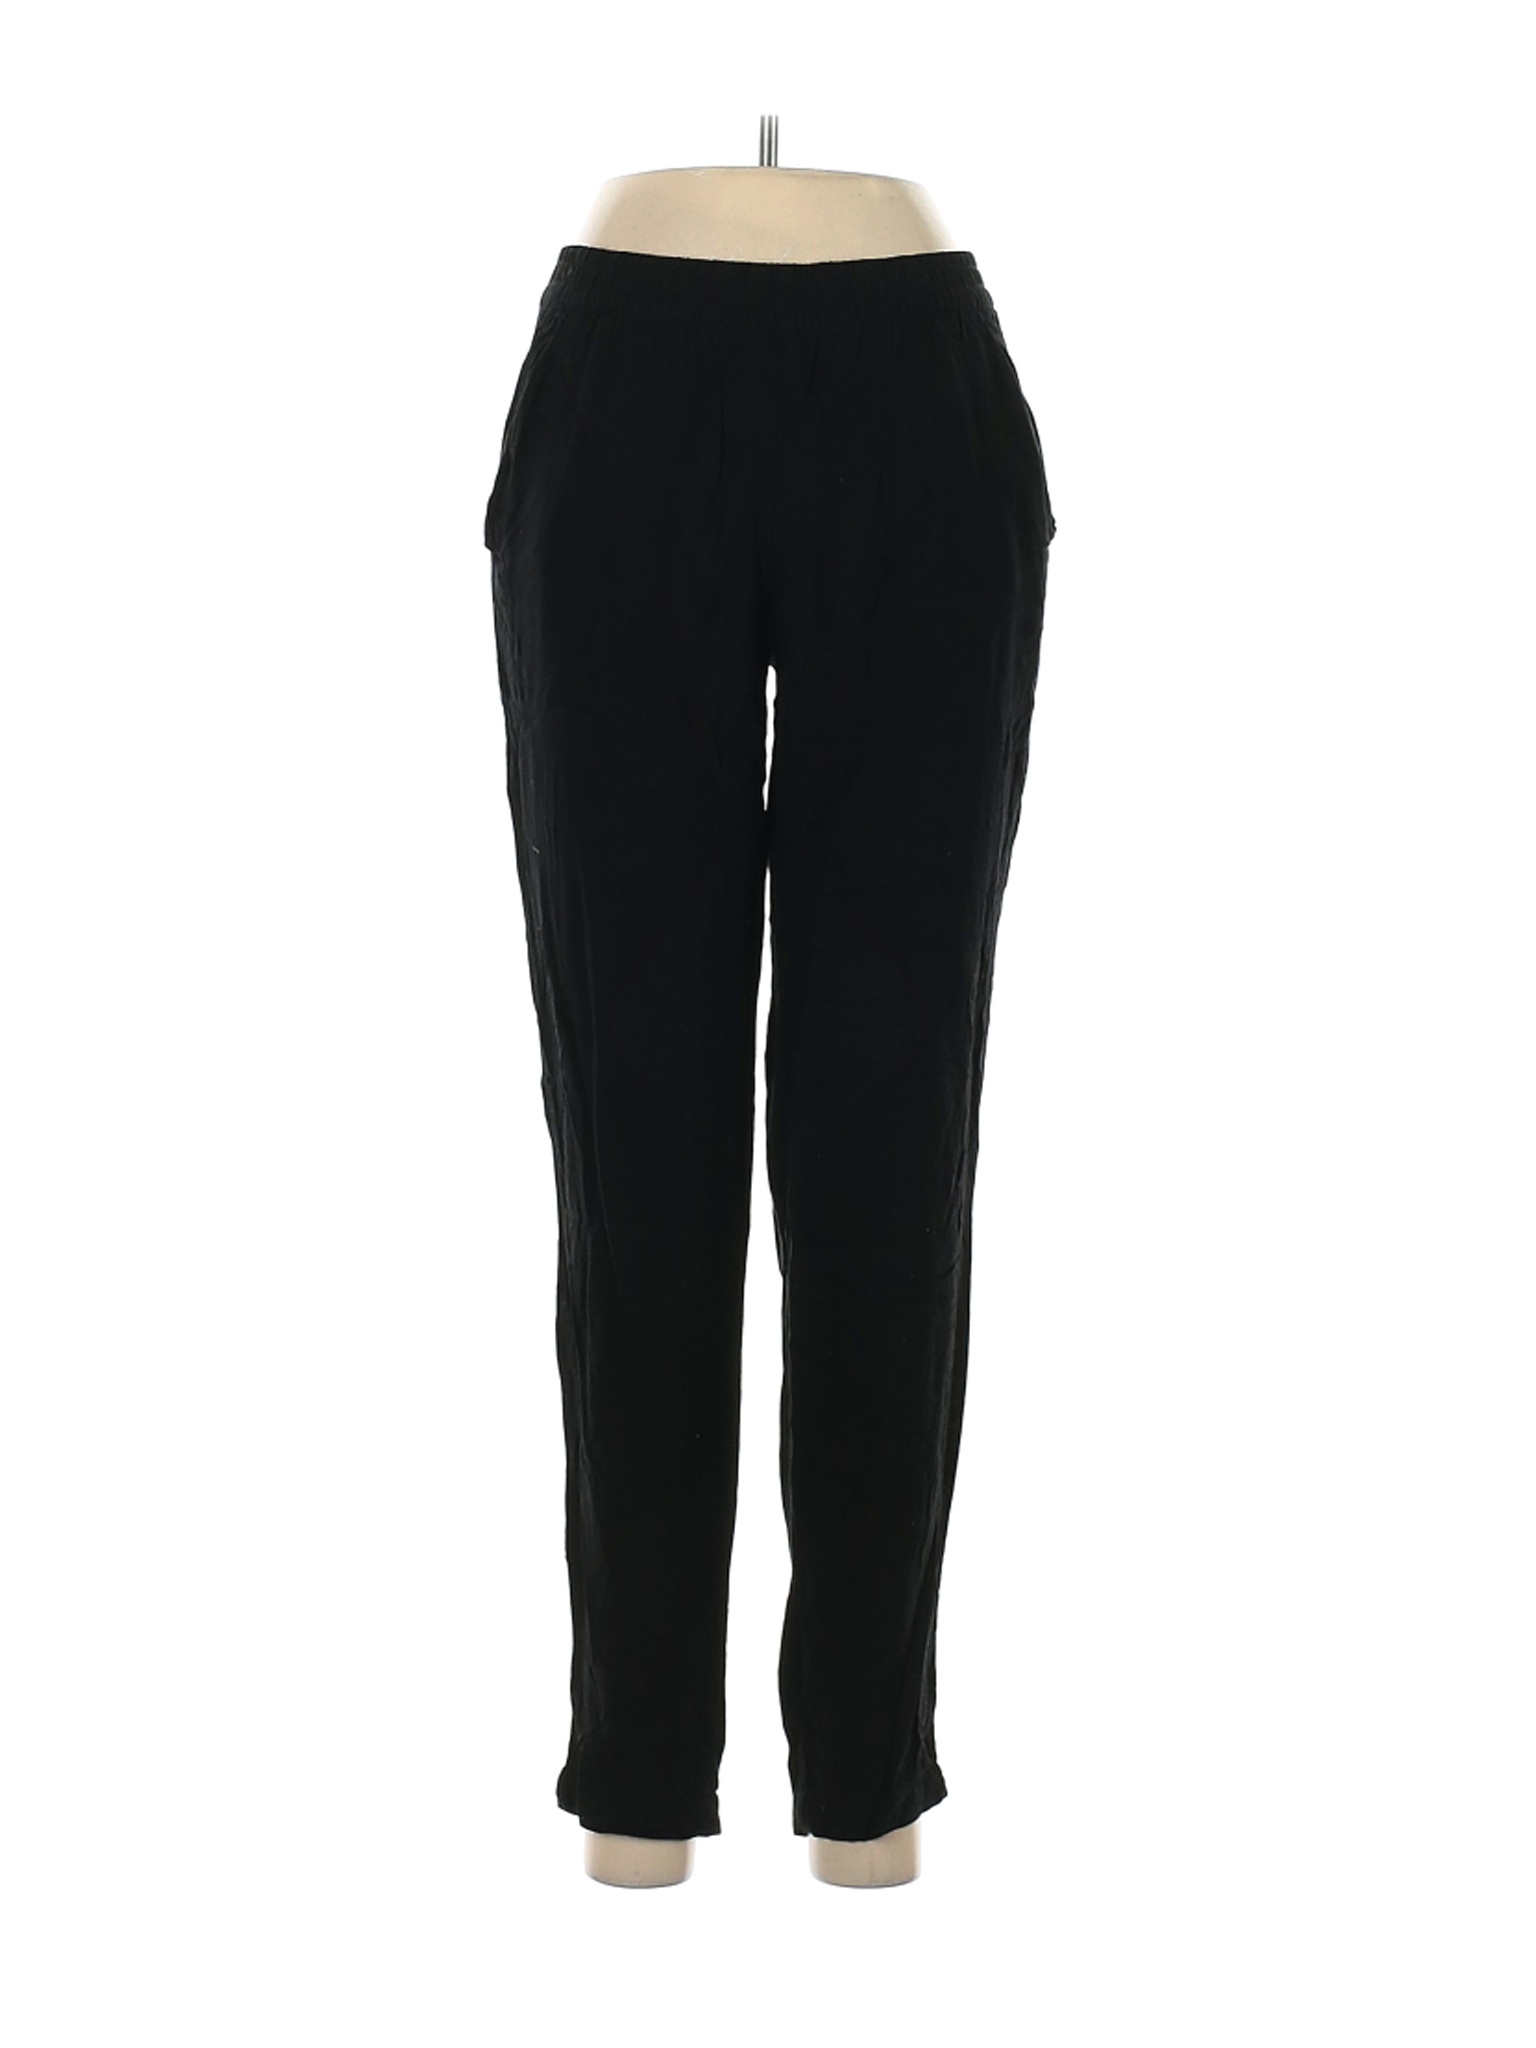 Divided by H&M Women Black Casual Pants 6 | eBay